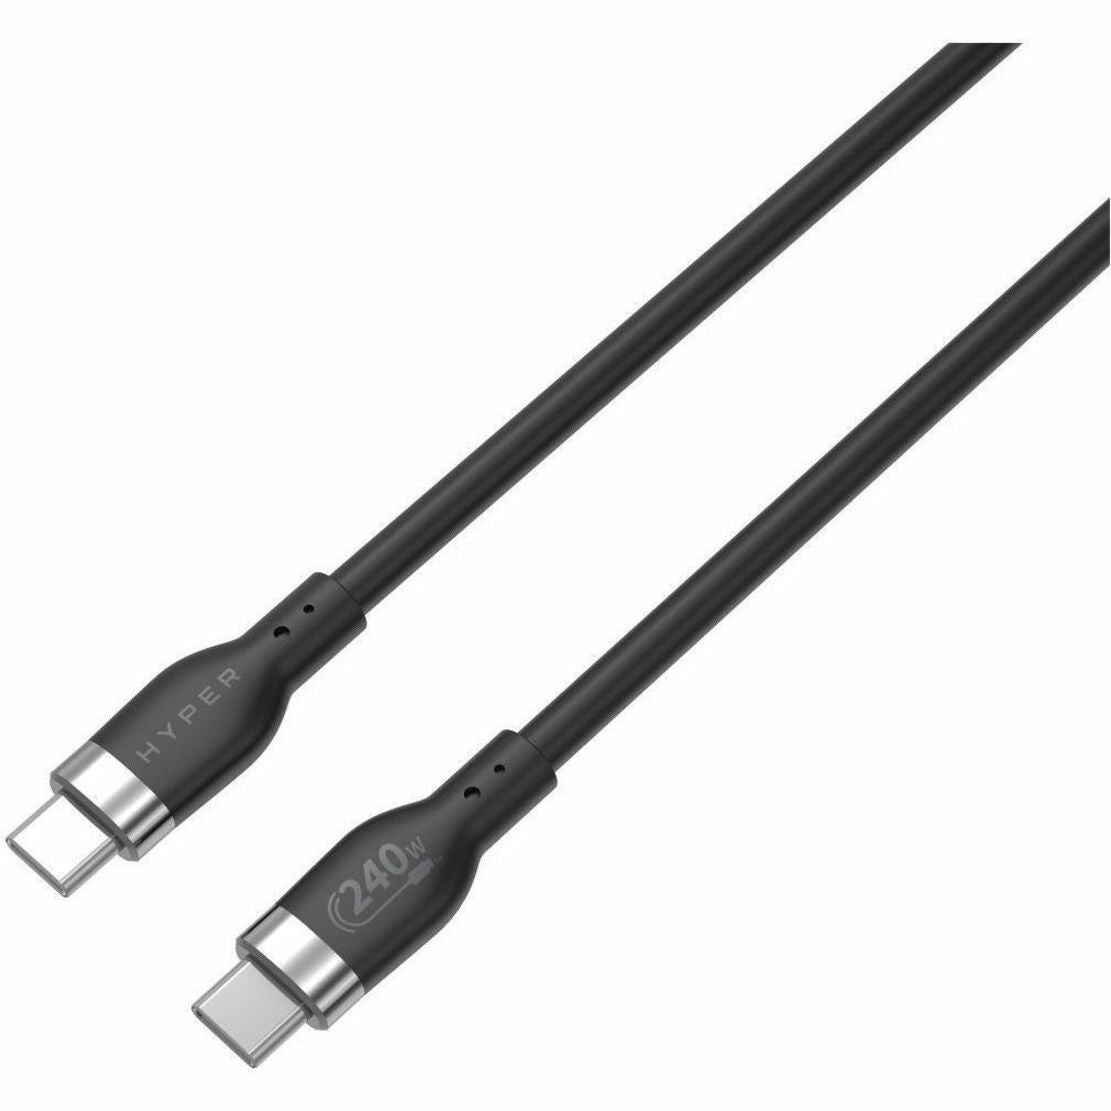 Targus Charging Cable - 6.56 ft Cord Length - USB Type C (HJ4002BKGL)